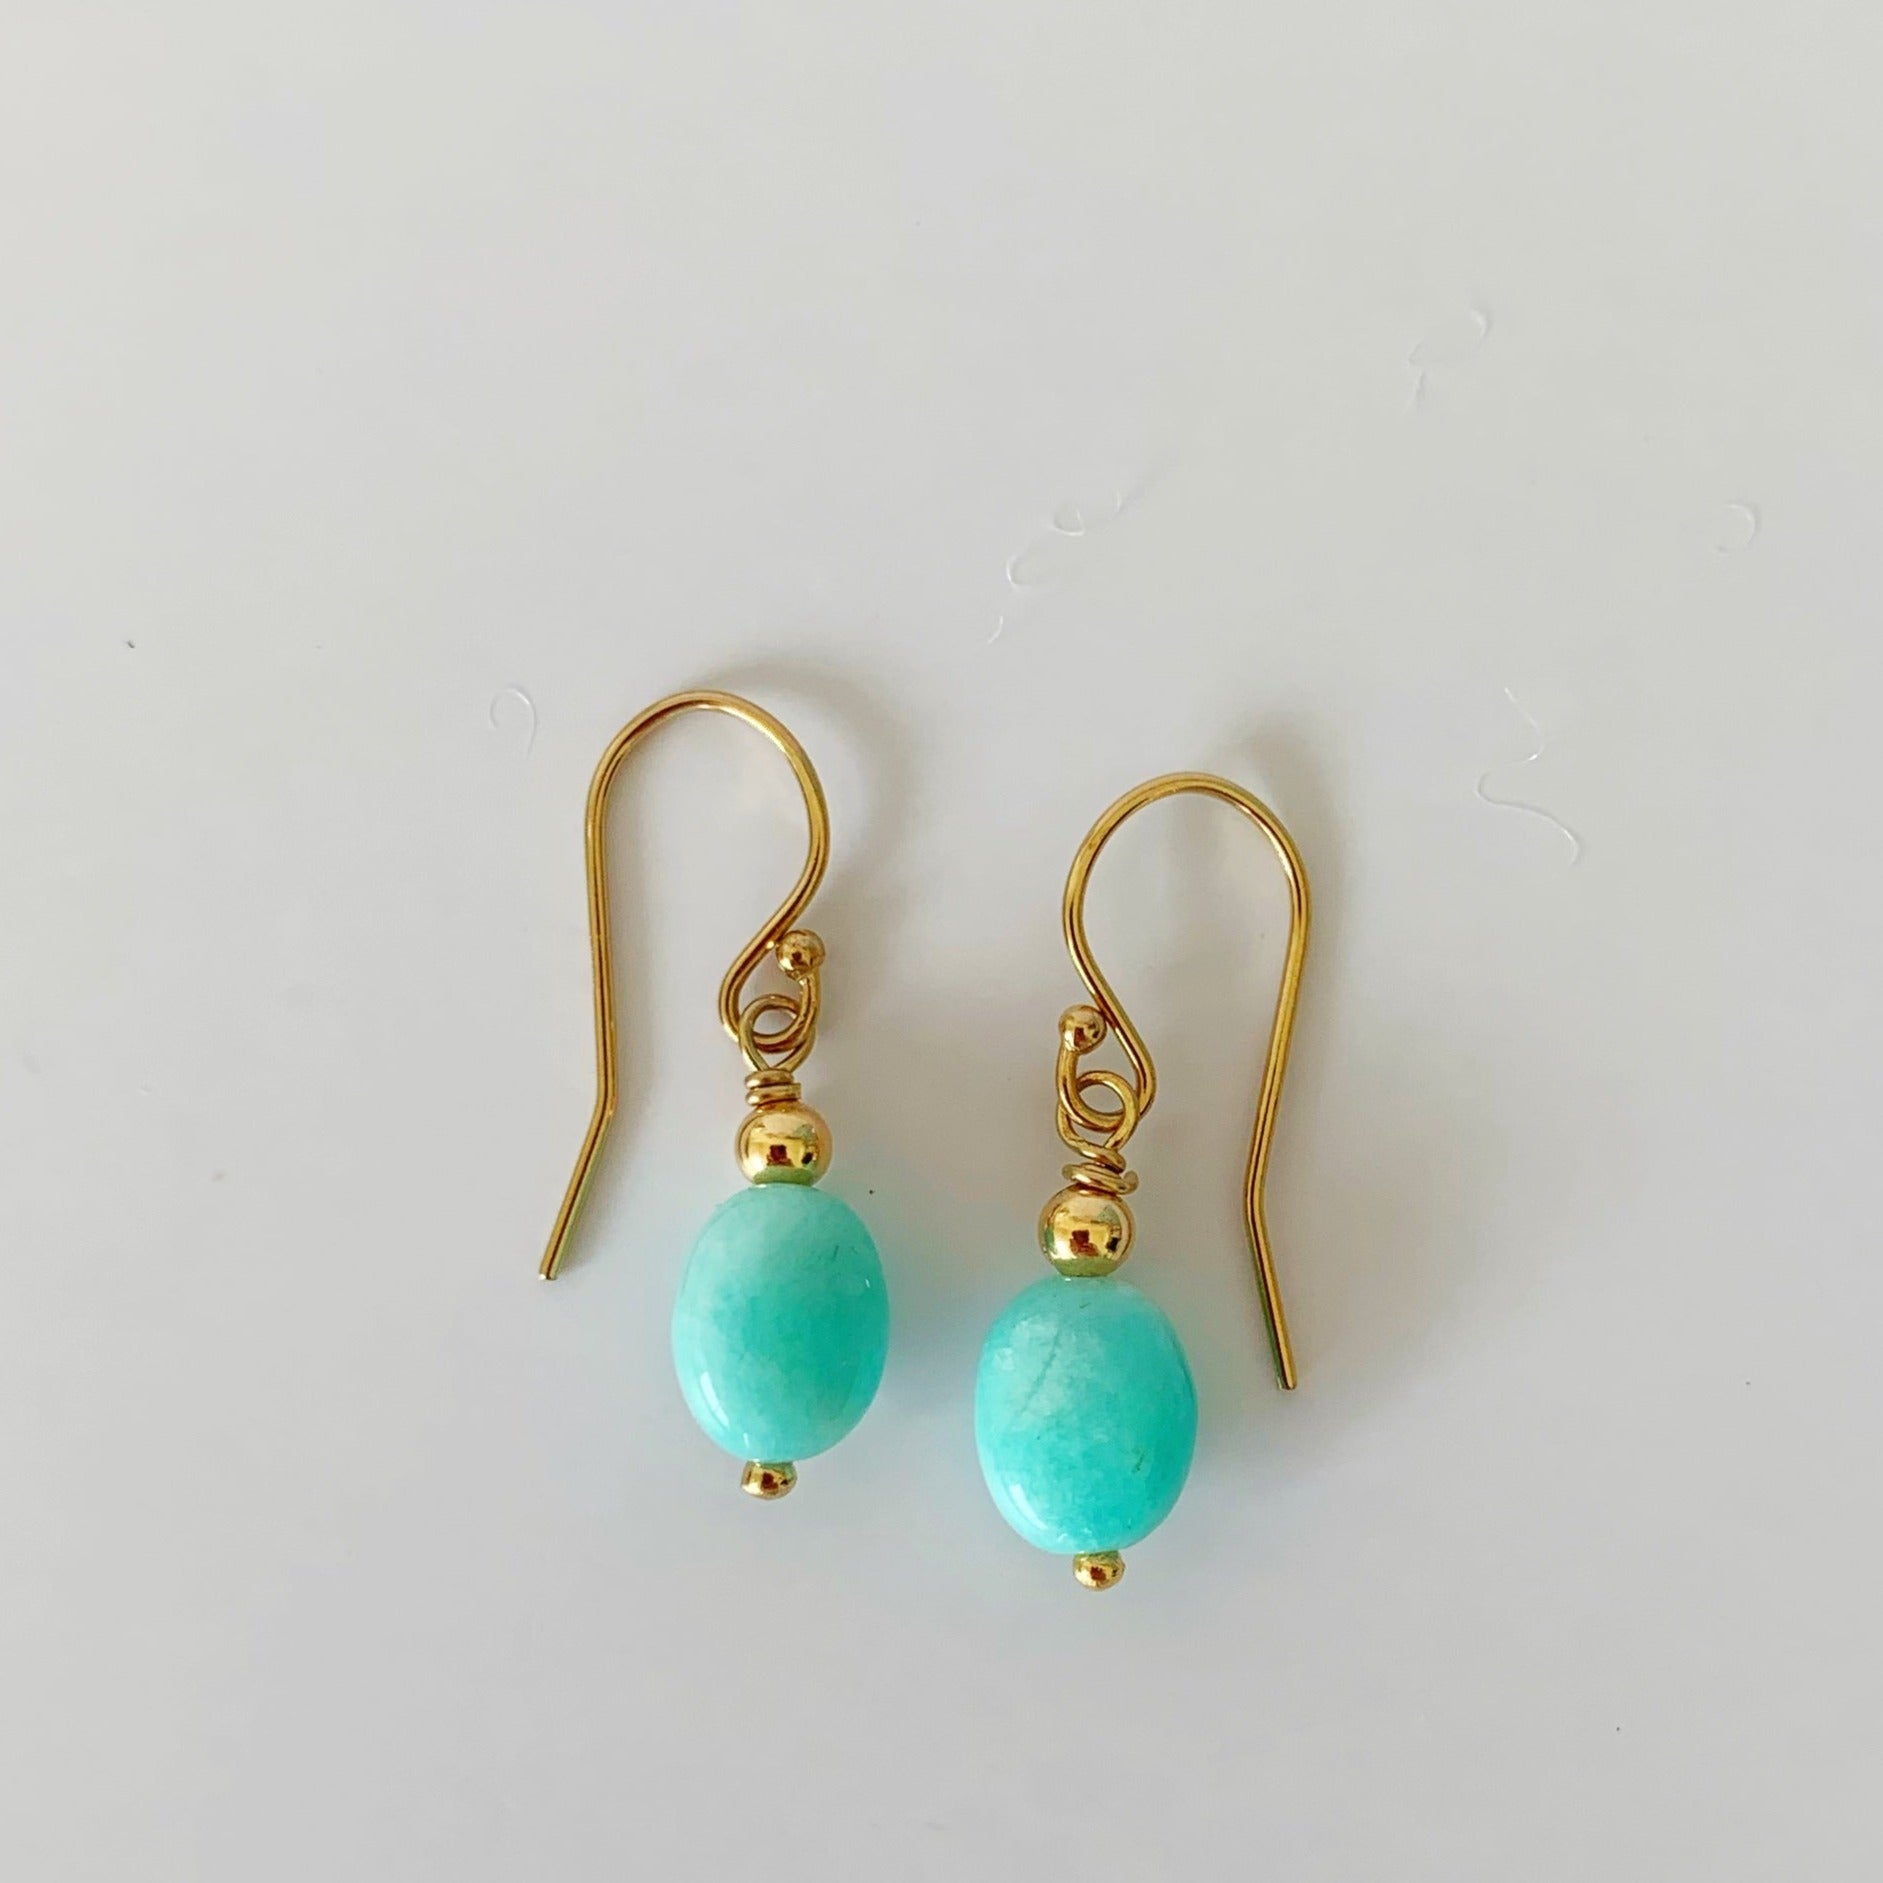 Mermaids and madeleines laguna earrings are created with amazonite ovals and 14k gold filled beads and findings. This pair of drop style earrings is photographed on a white background